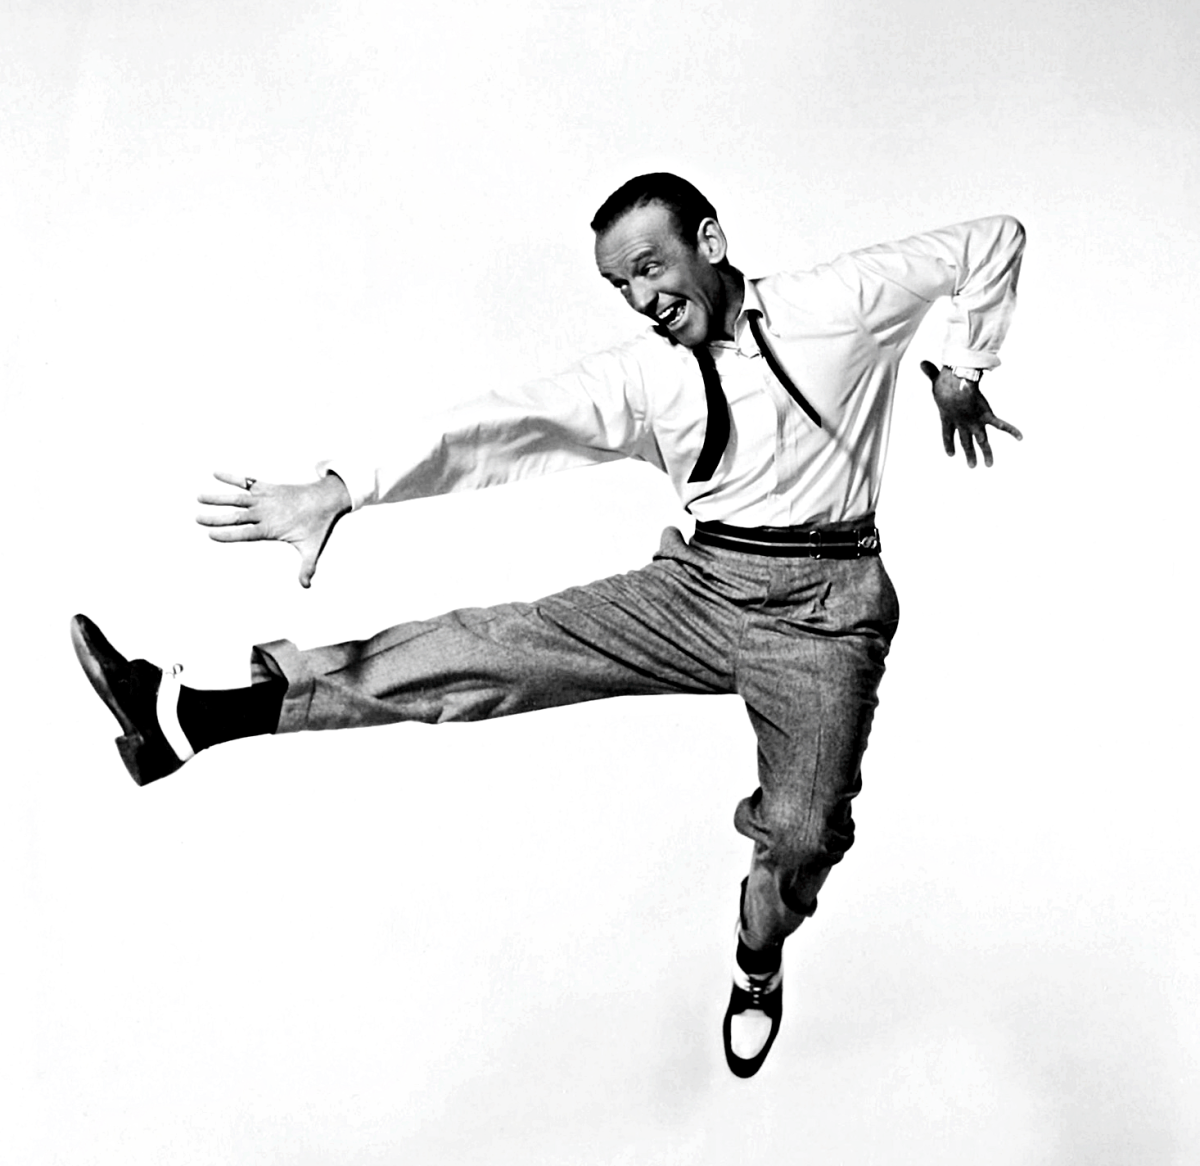 Fred Astaire, the greatest dancer in film history